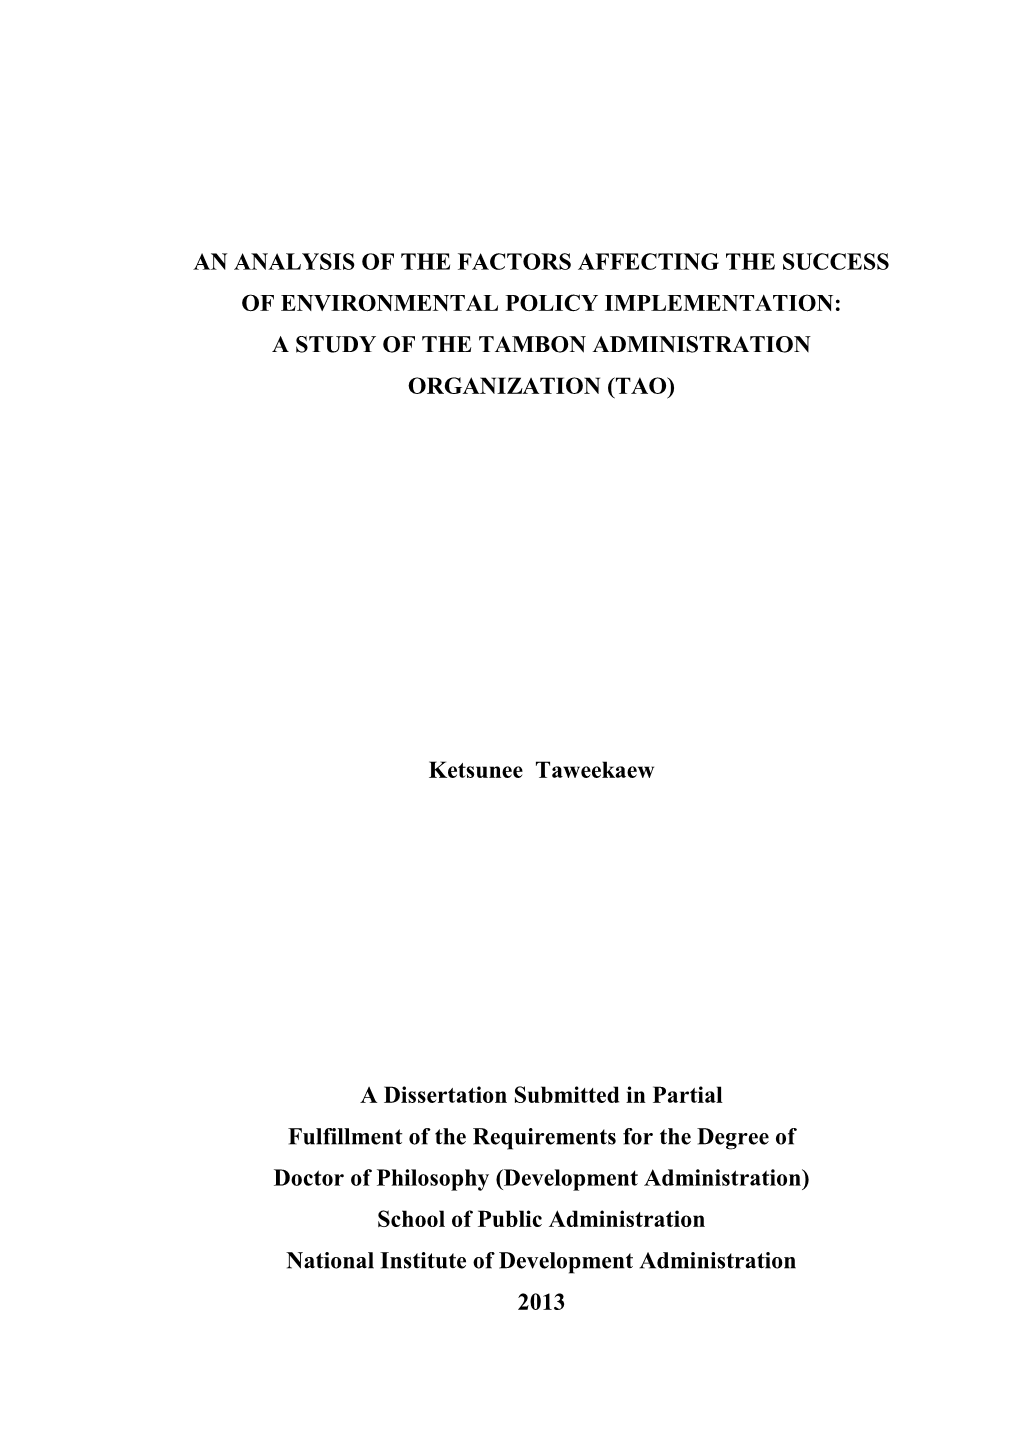 An Analysis of the Factors Affecting the Success of Environmental Policy Implementation: a Study of the Tambon Administration Organization (Tao)